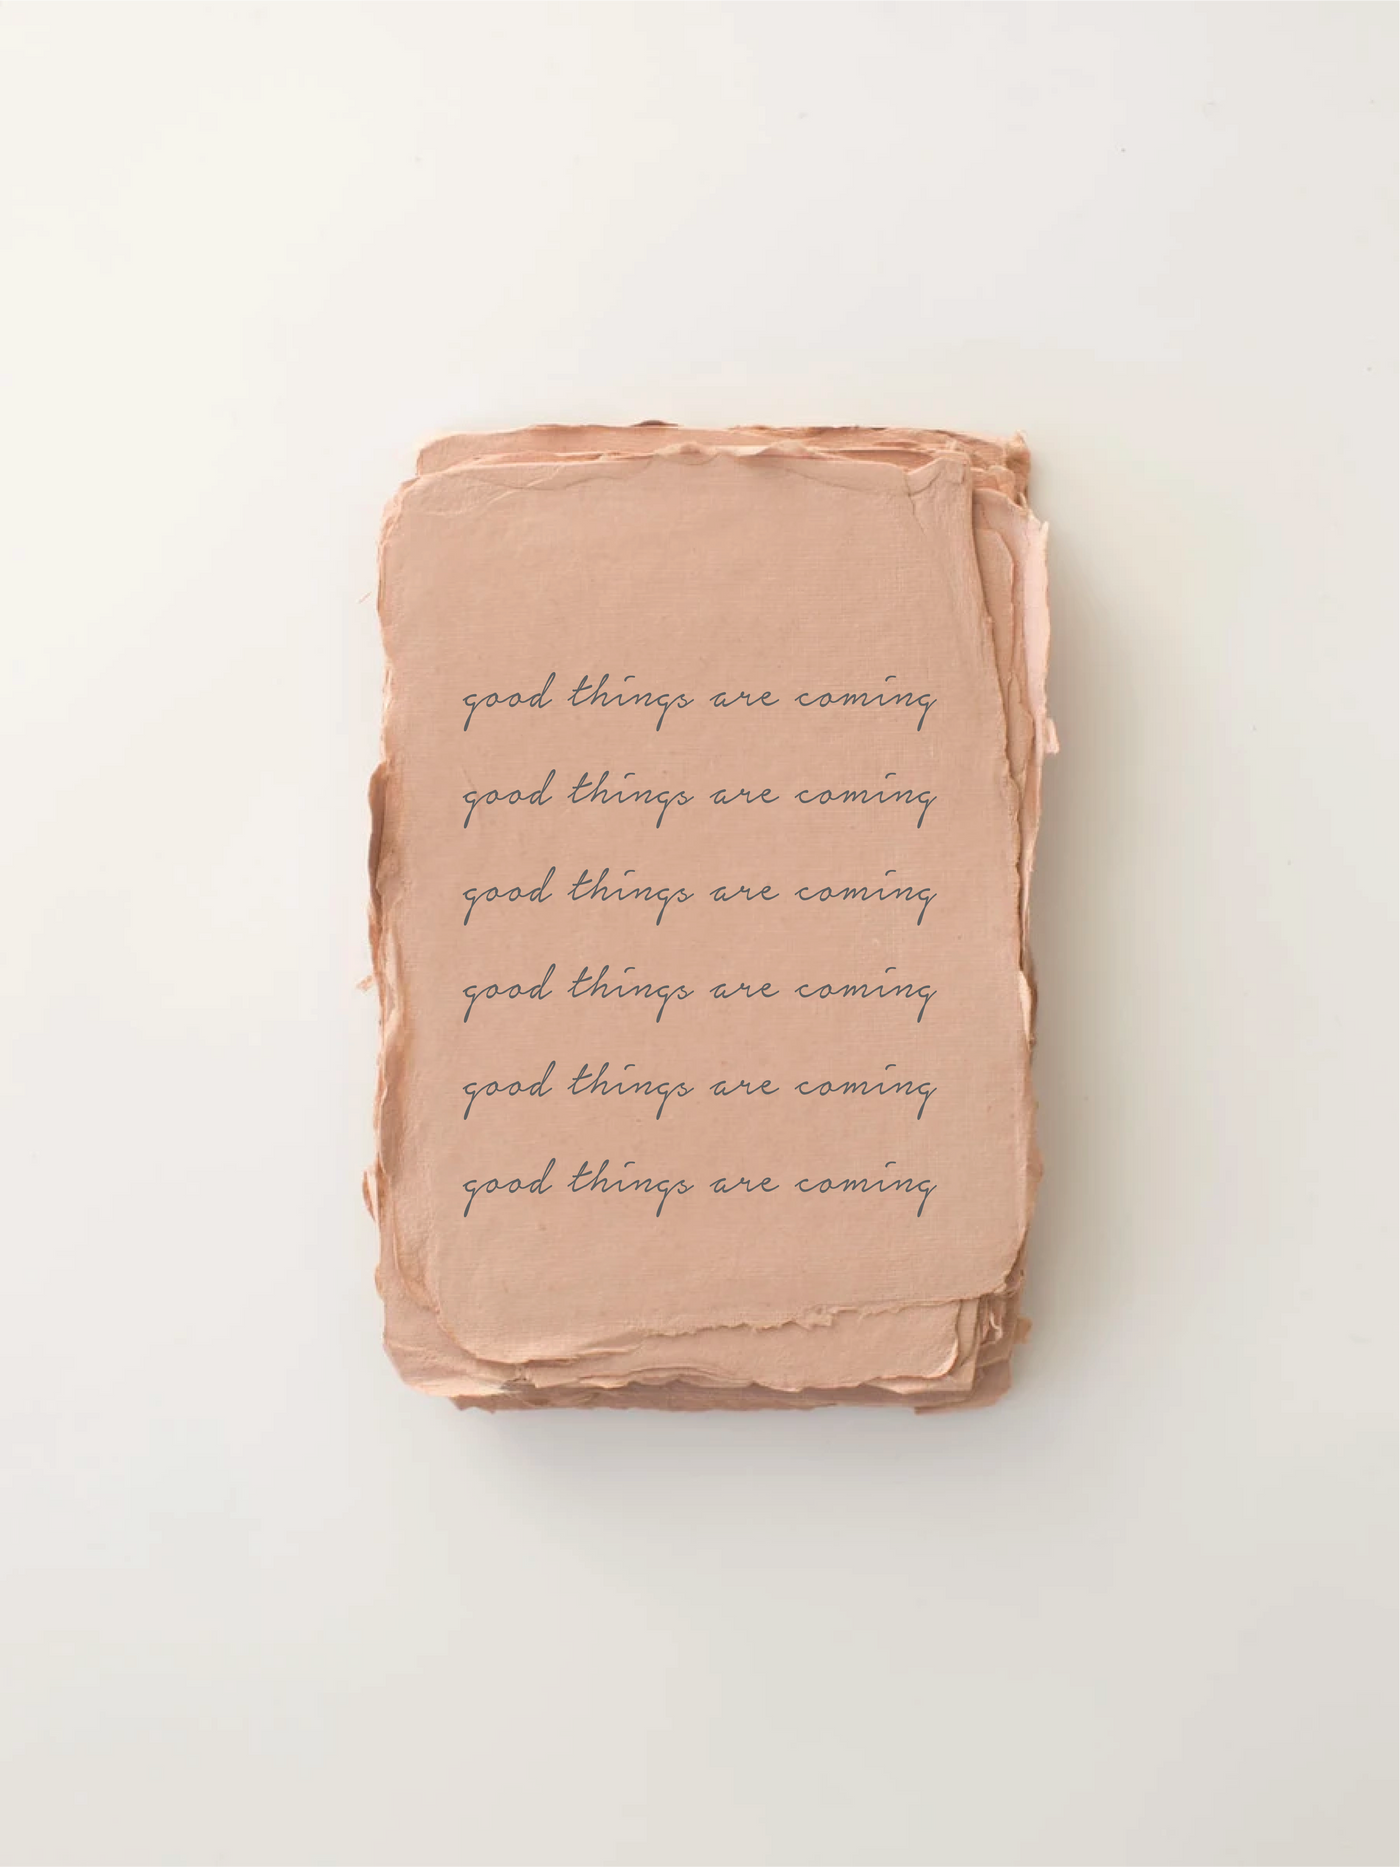 "Good things are coming." Encouragement Card